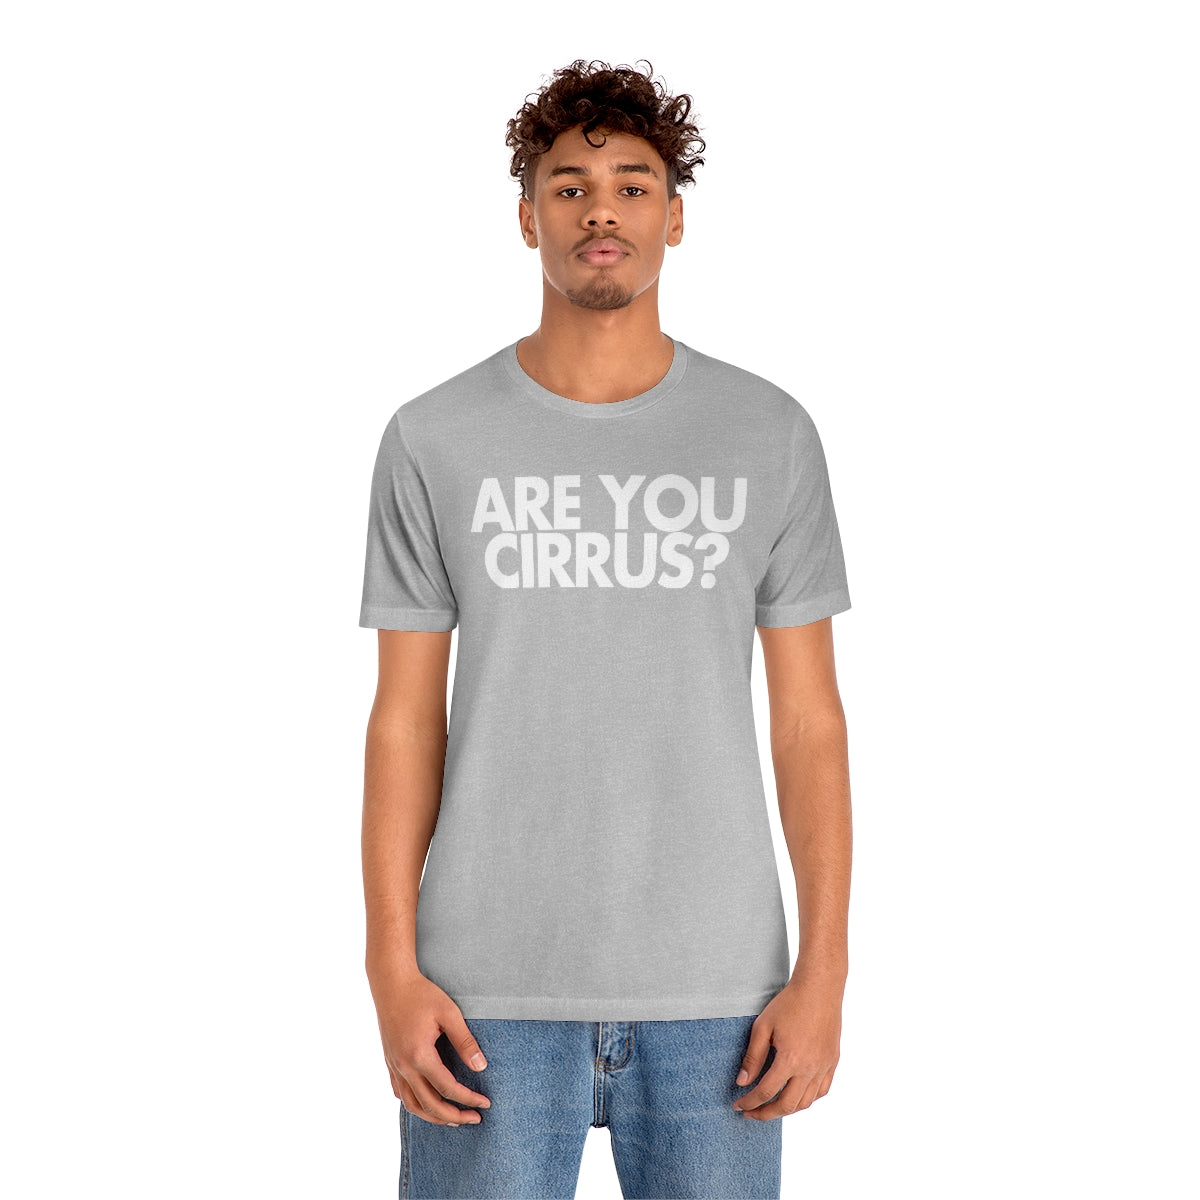 Are You Cirrus? Tee 